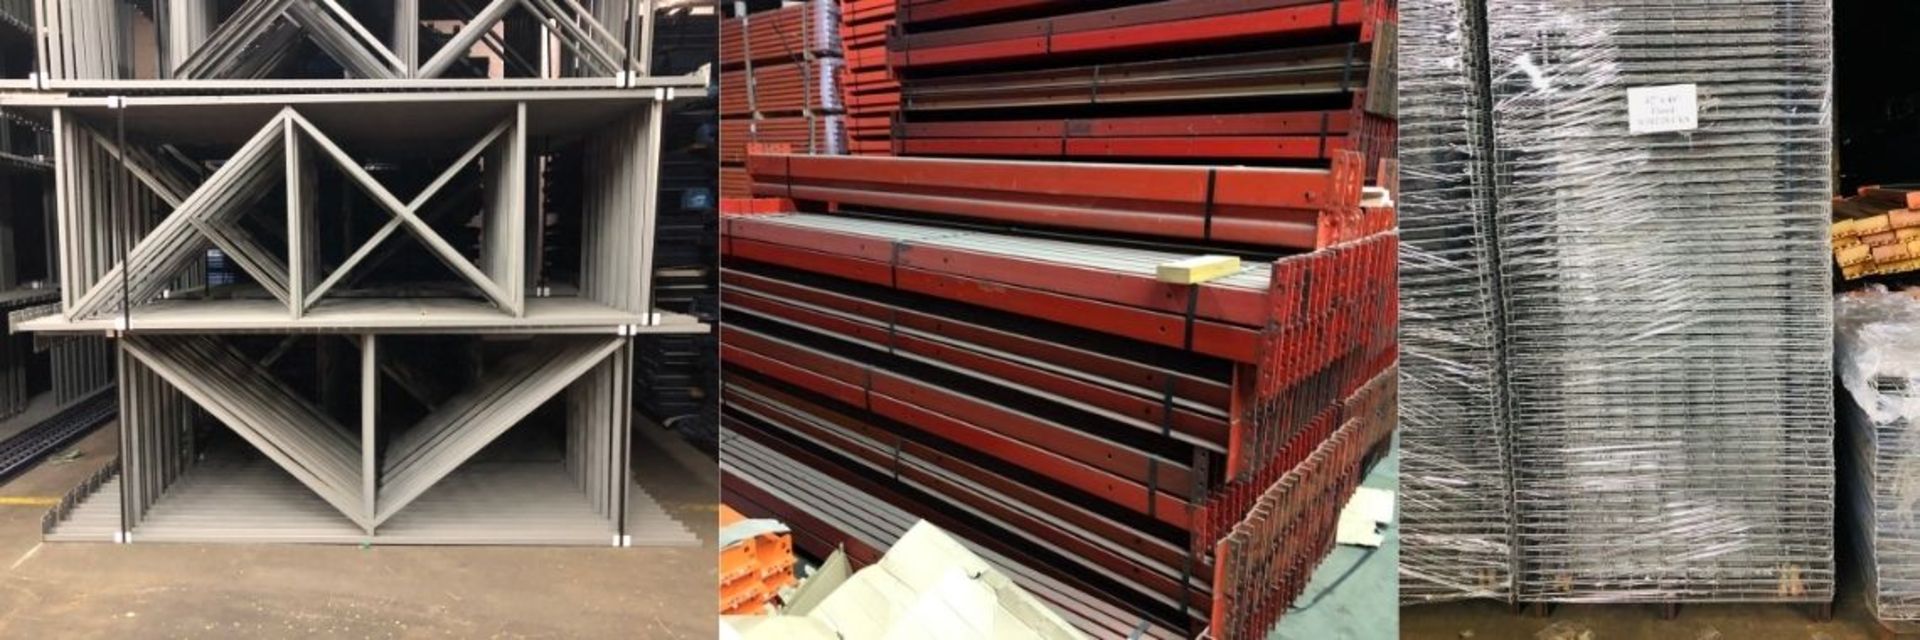 14 BAYS OF 10.5'H X 42"D X 102"L STRUCTURAL STYLE PALLET RACKS - Image 3 of 4